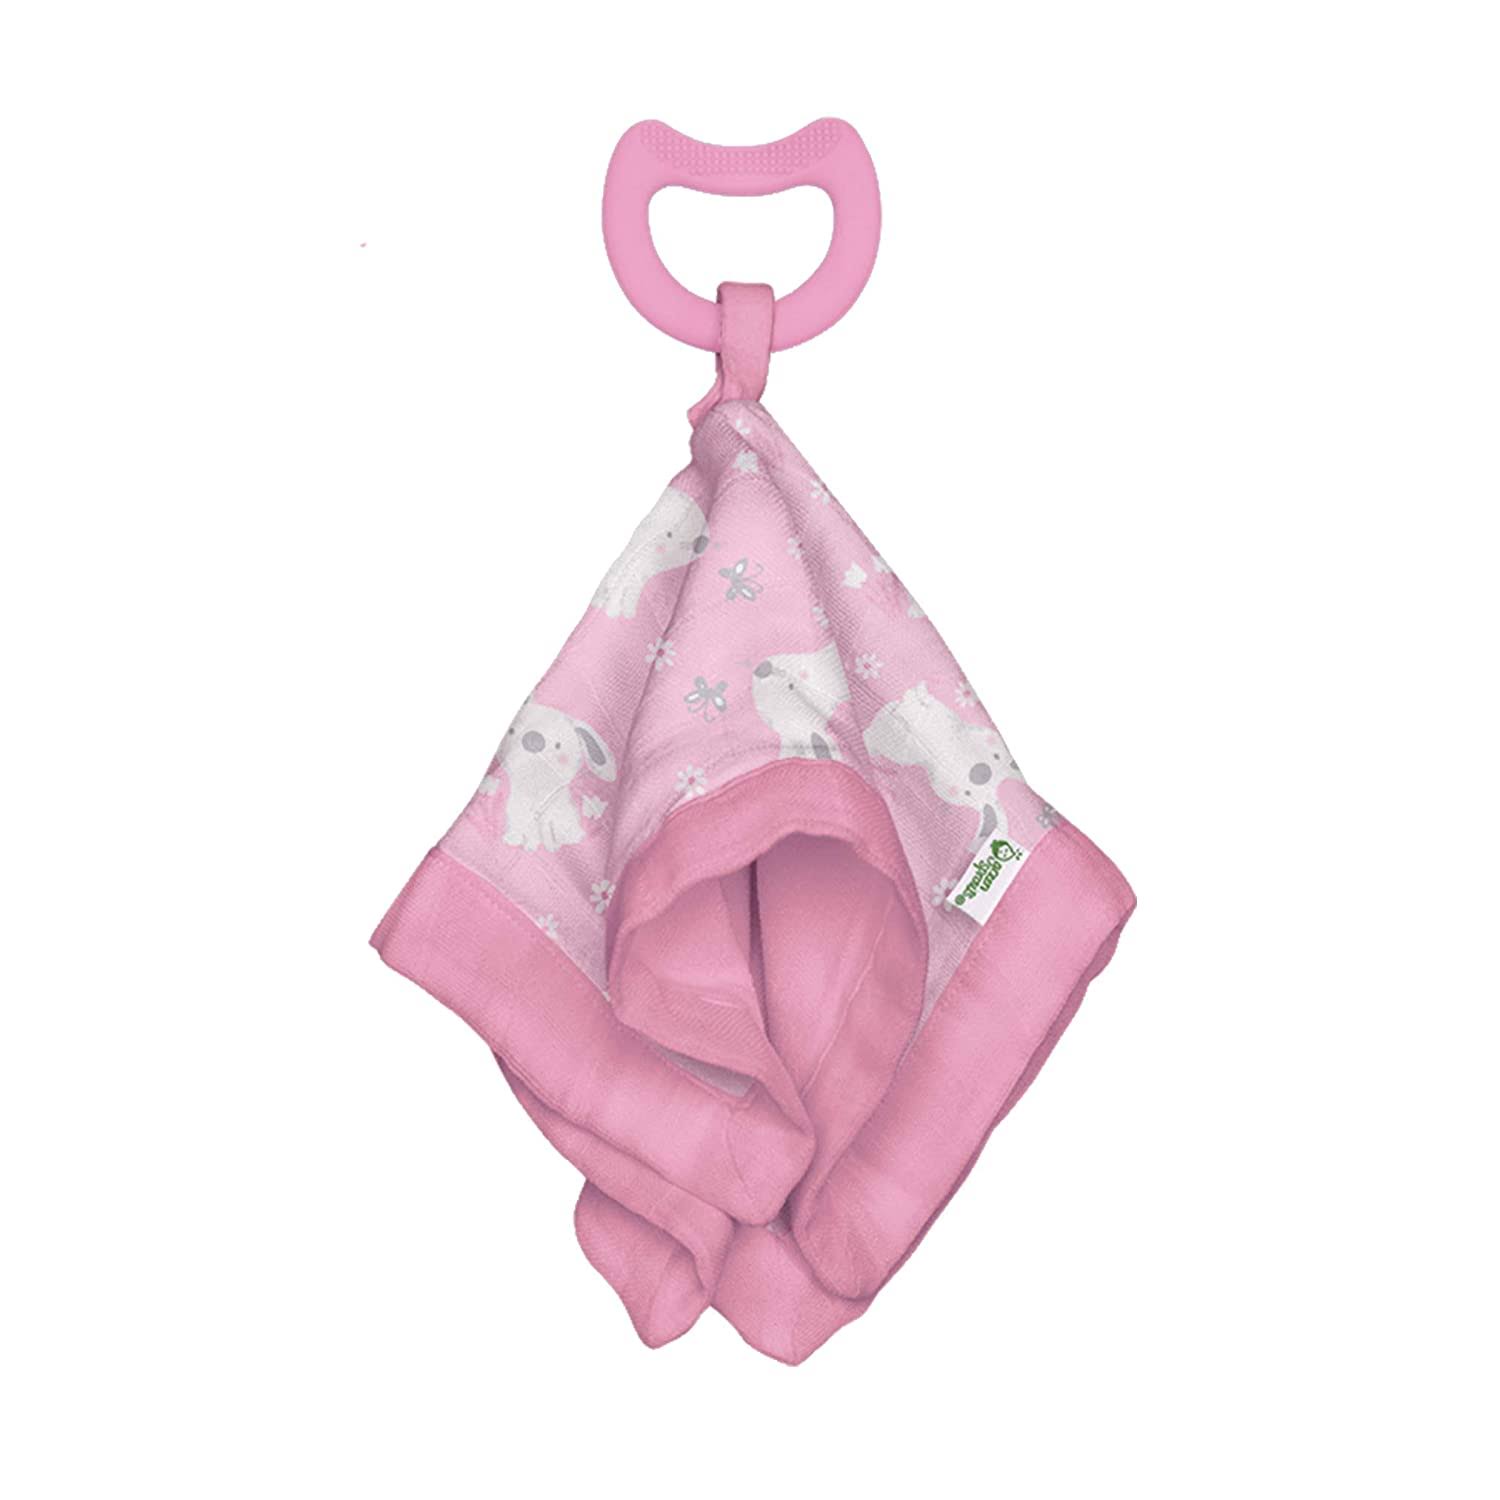 Green Sprouts Muslin Blankie Teether Made from Organic Cotton, Pink